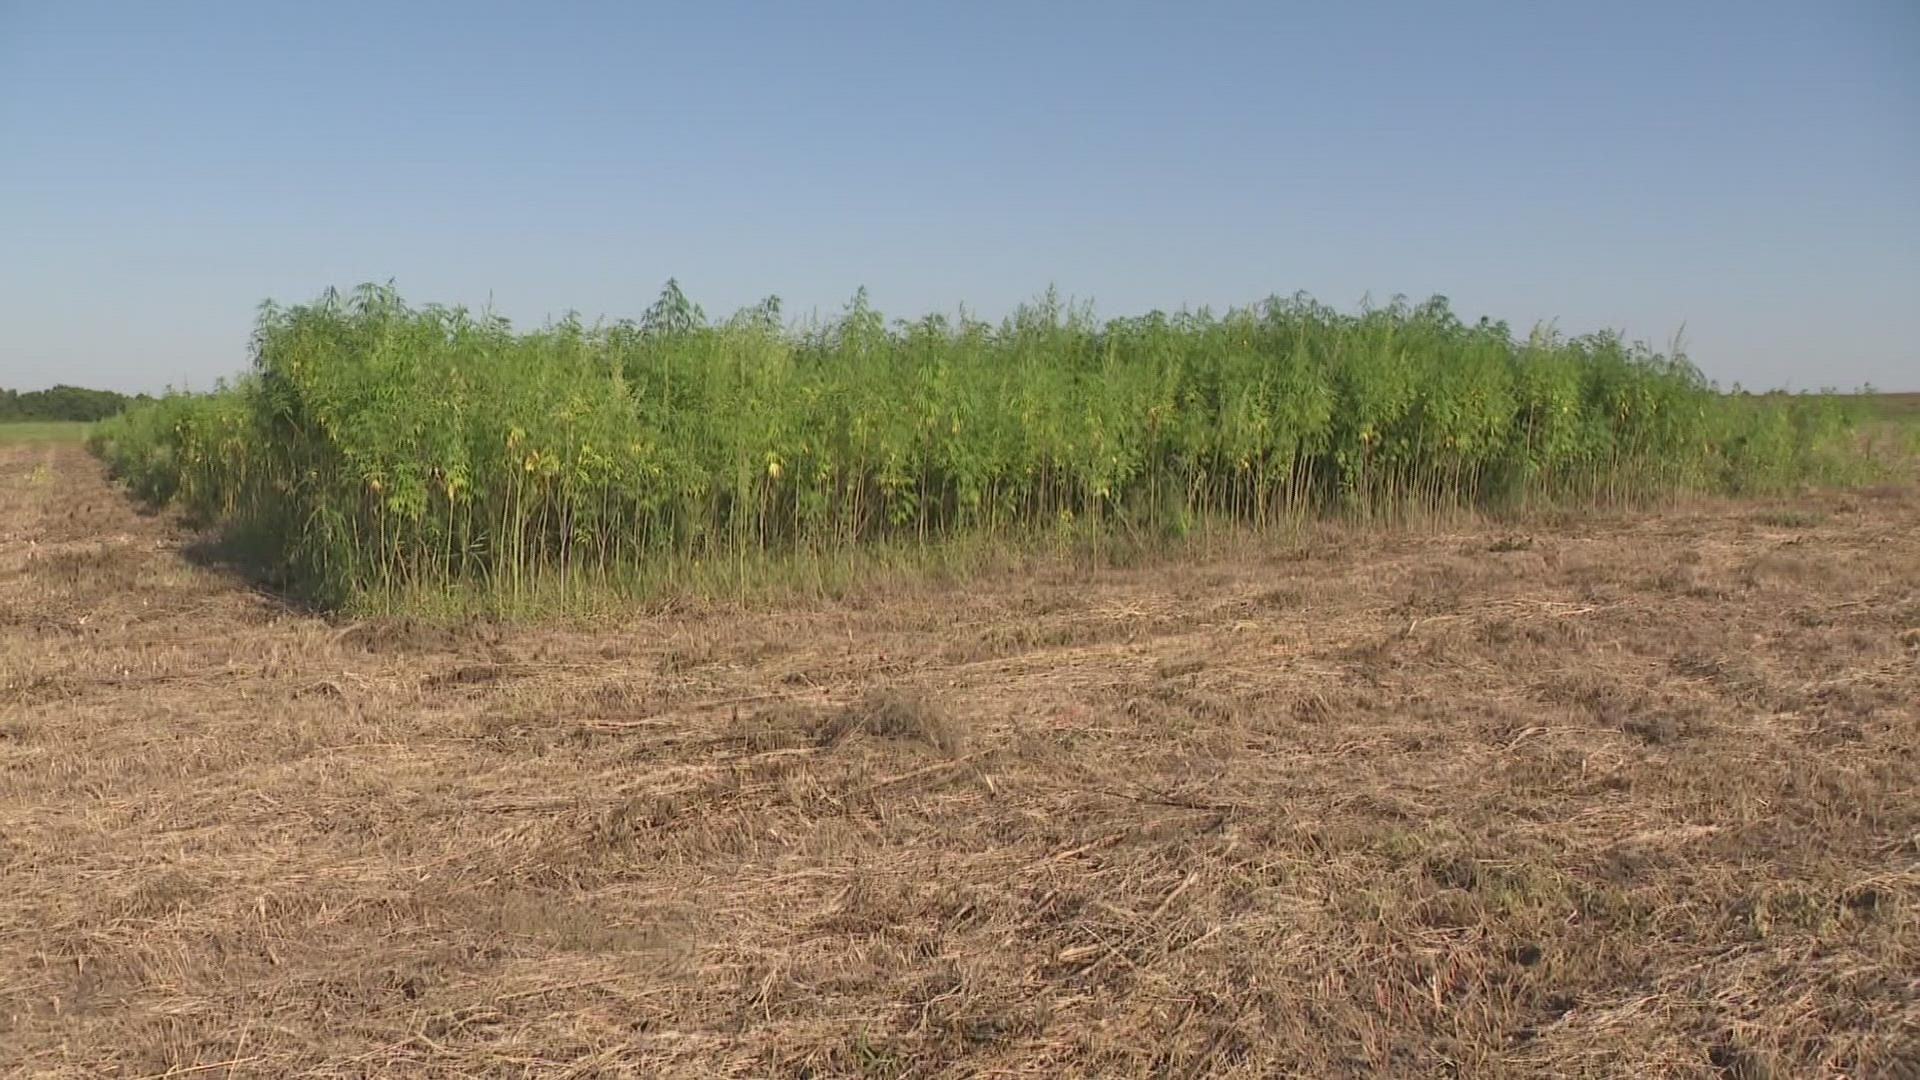 It's been three years since hemp was legalized in Texas, and part of the reason is because the plant is drought-tolerant.